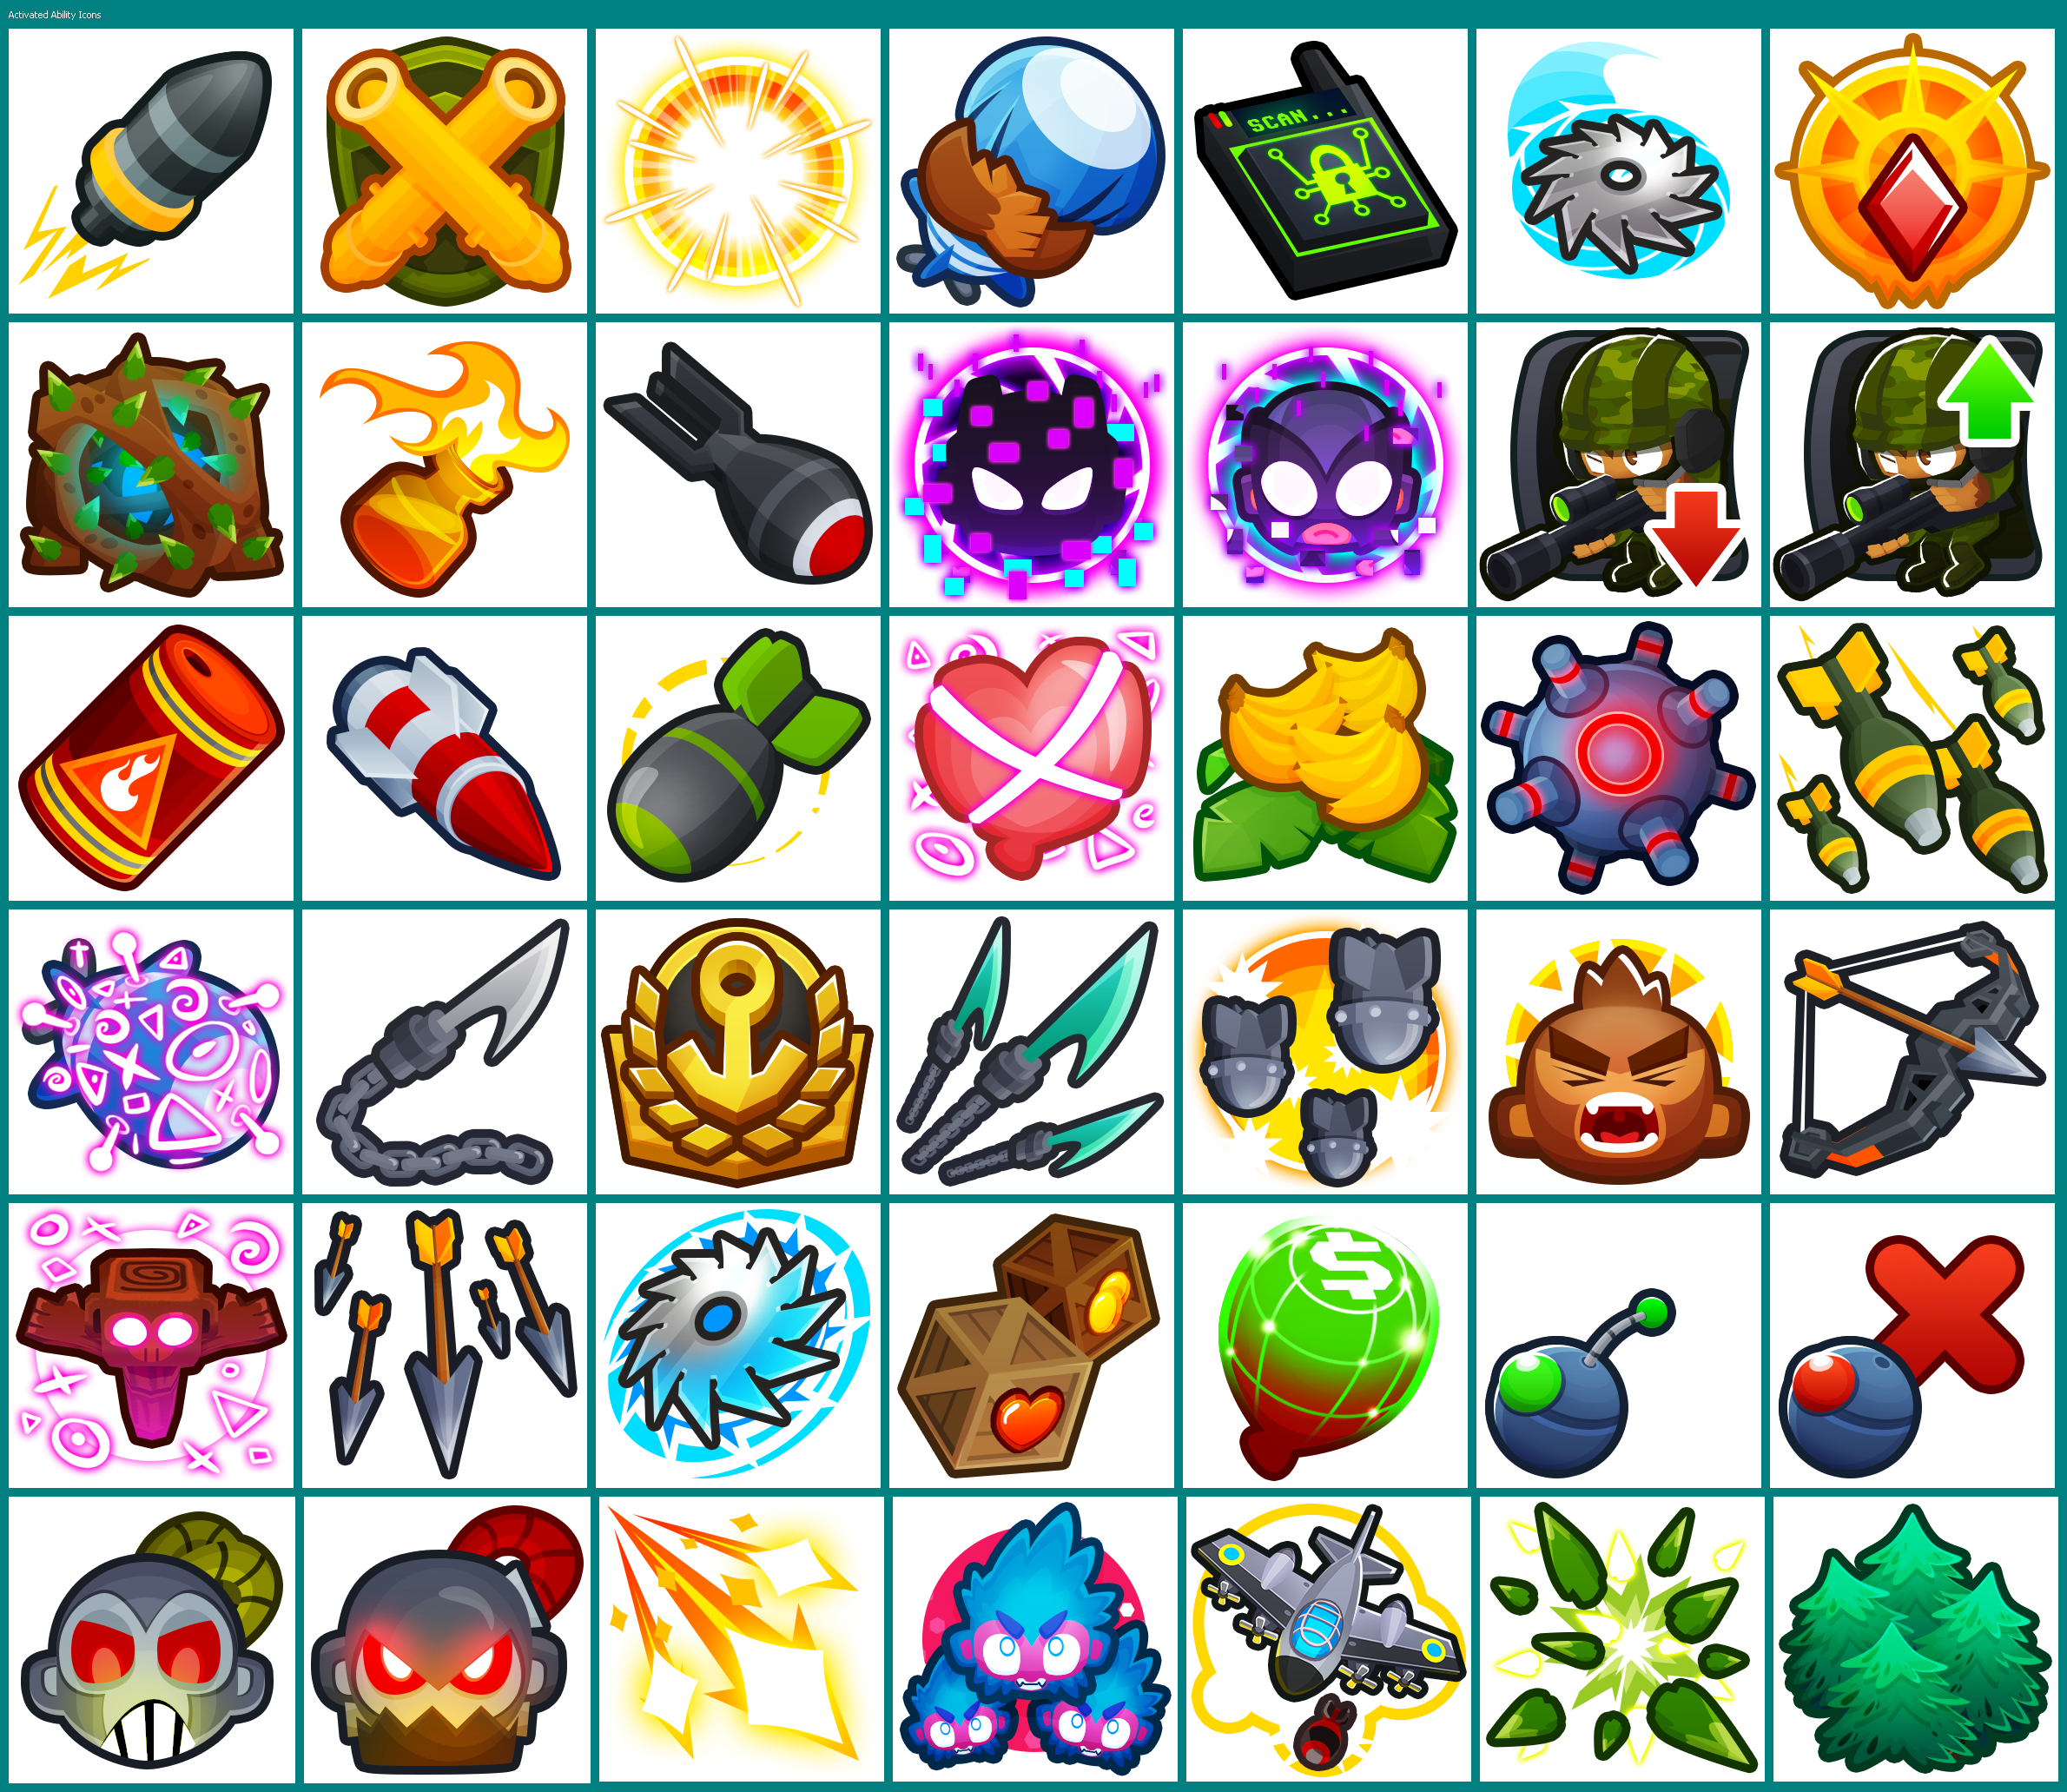 Activated Ability Icons